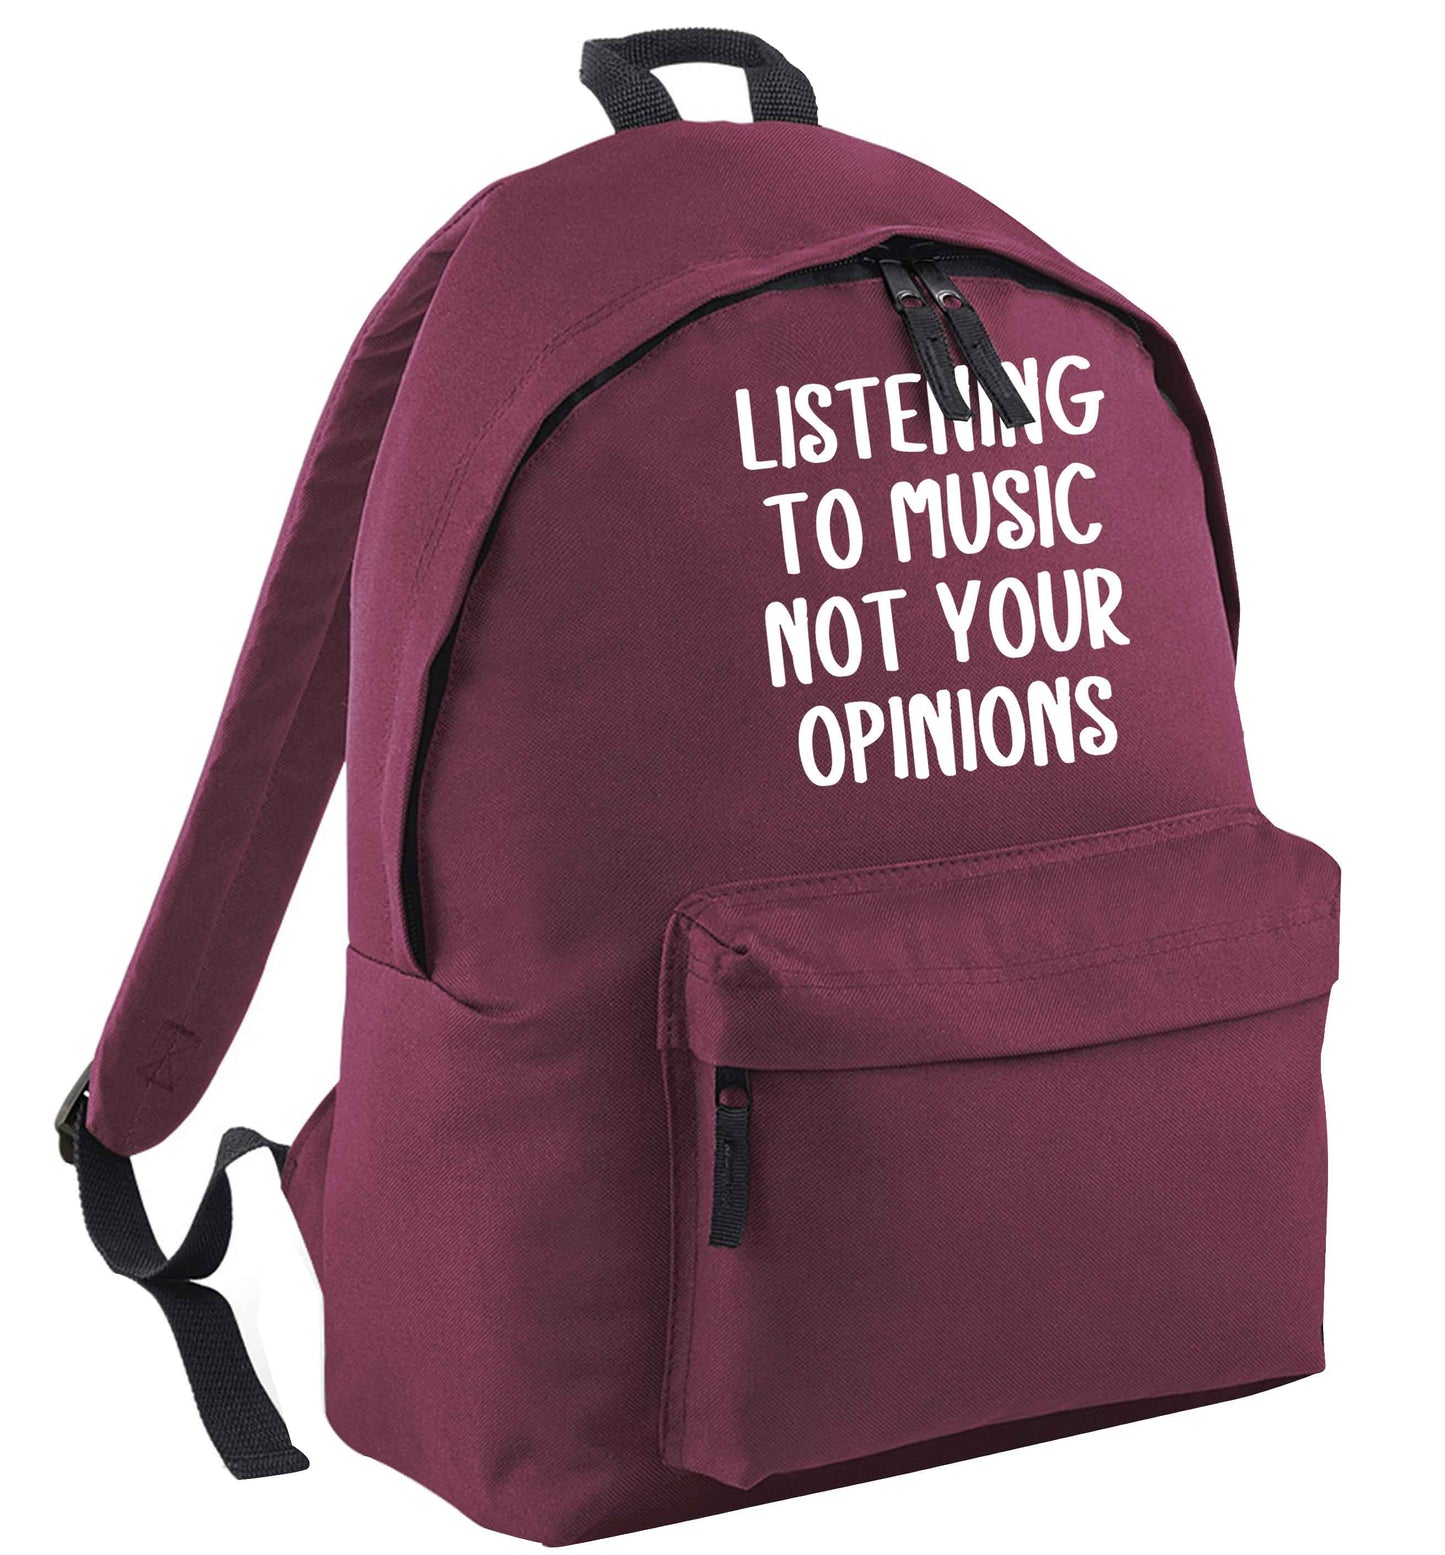 Listening to music not your opinions maroon adults backpack